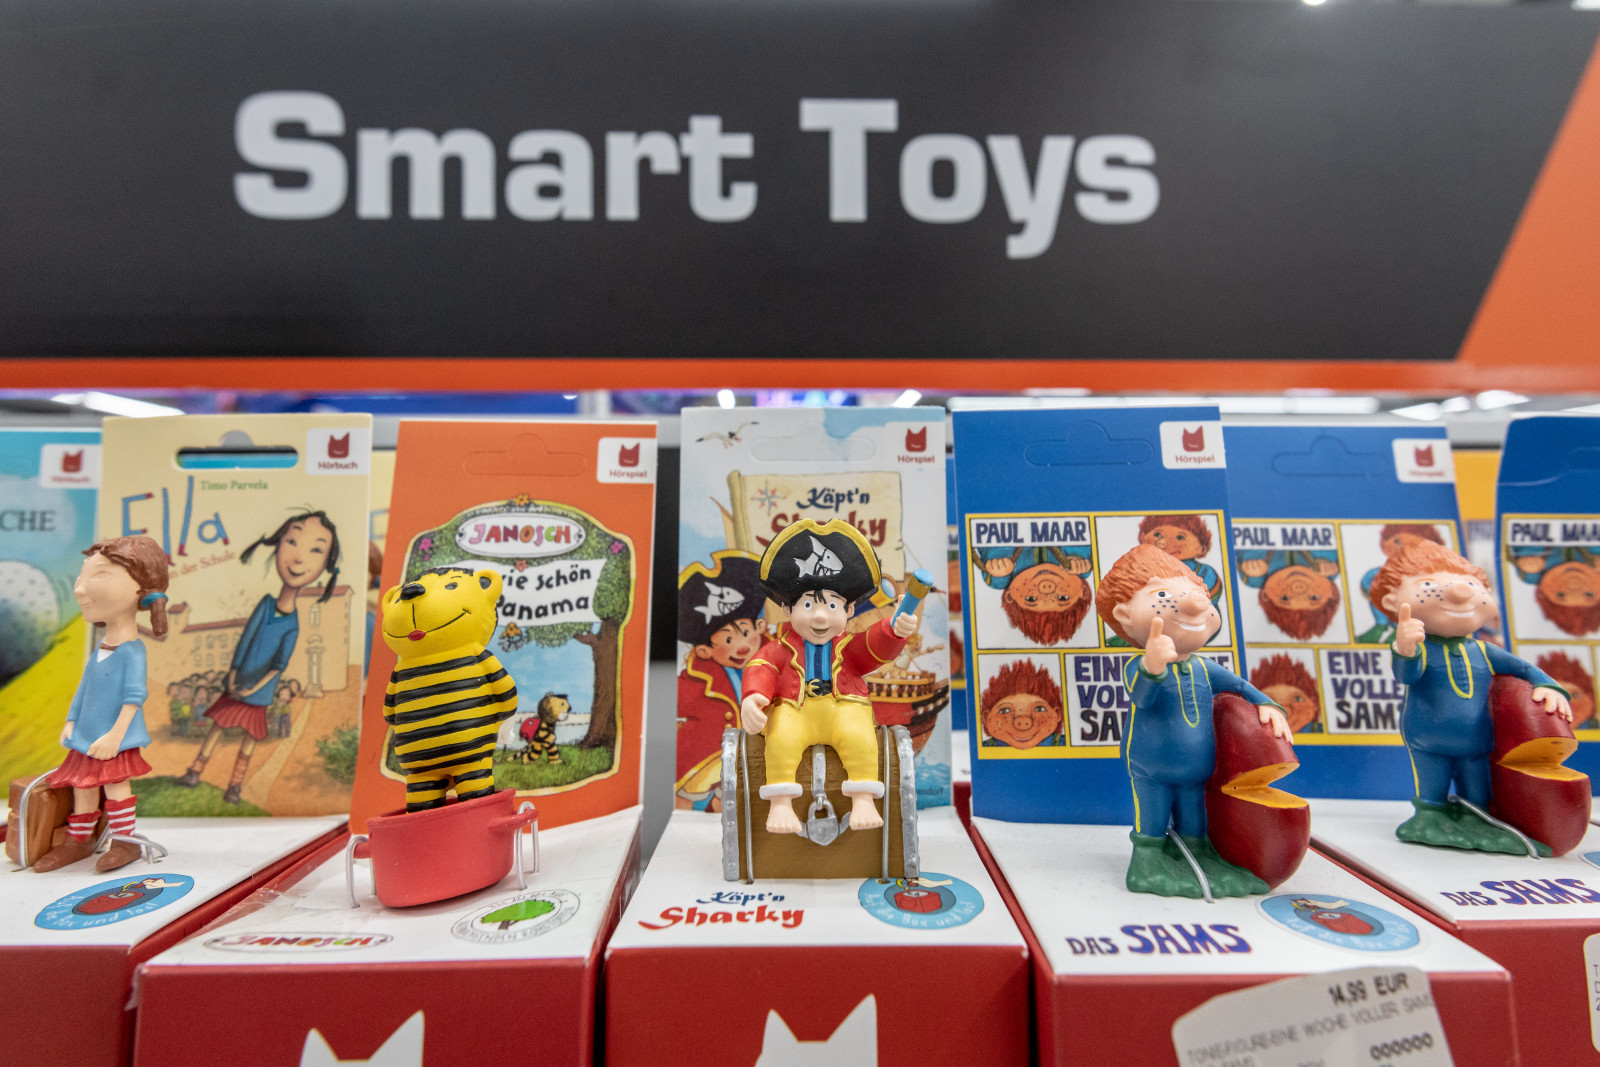 A sign that says "Smart Toys" is seen above a display of five colorful toy figurines